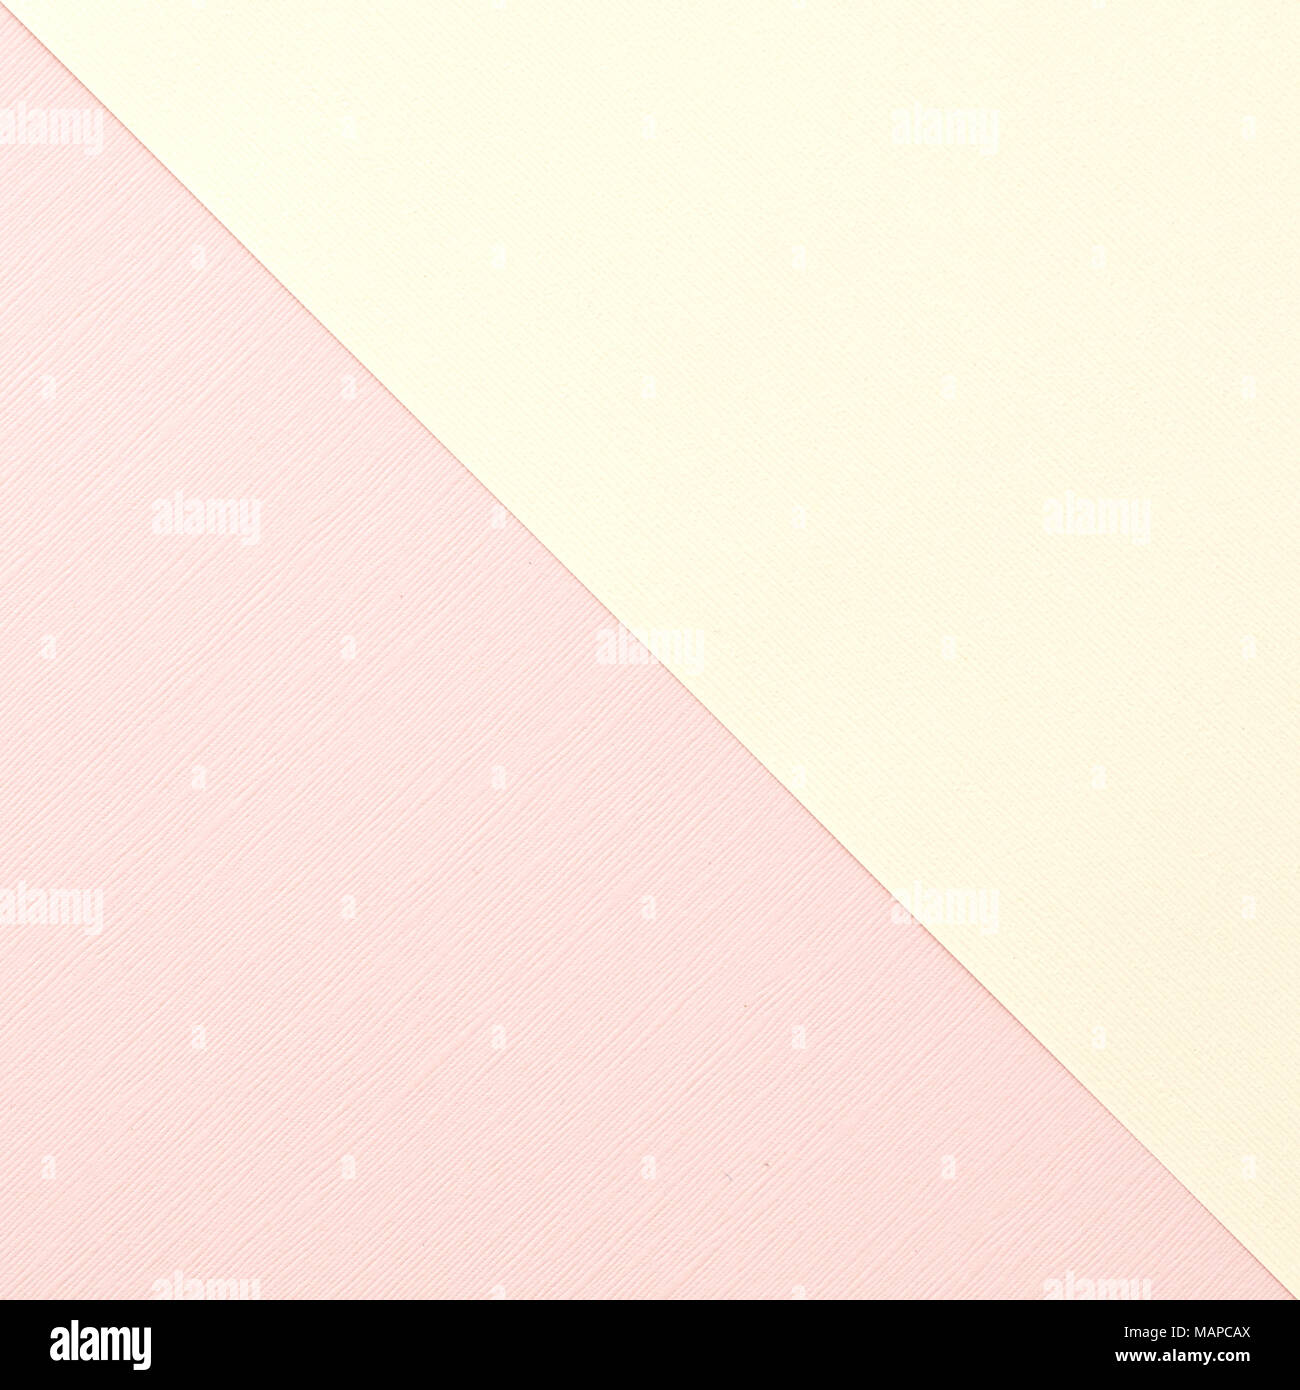 Yellow and pink blush two toned paper background textured image for copy or text overlay Stock Photo